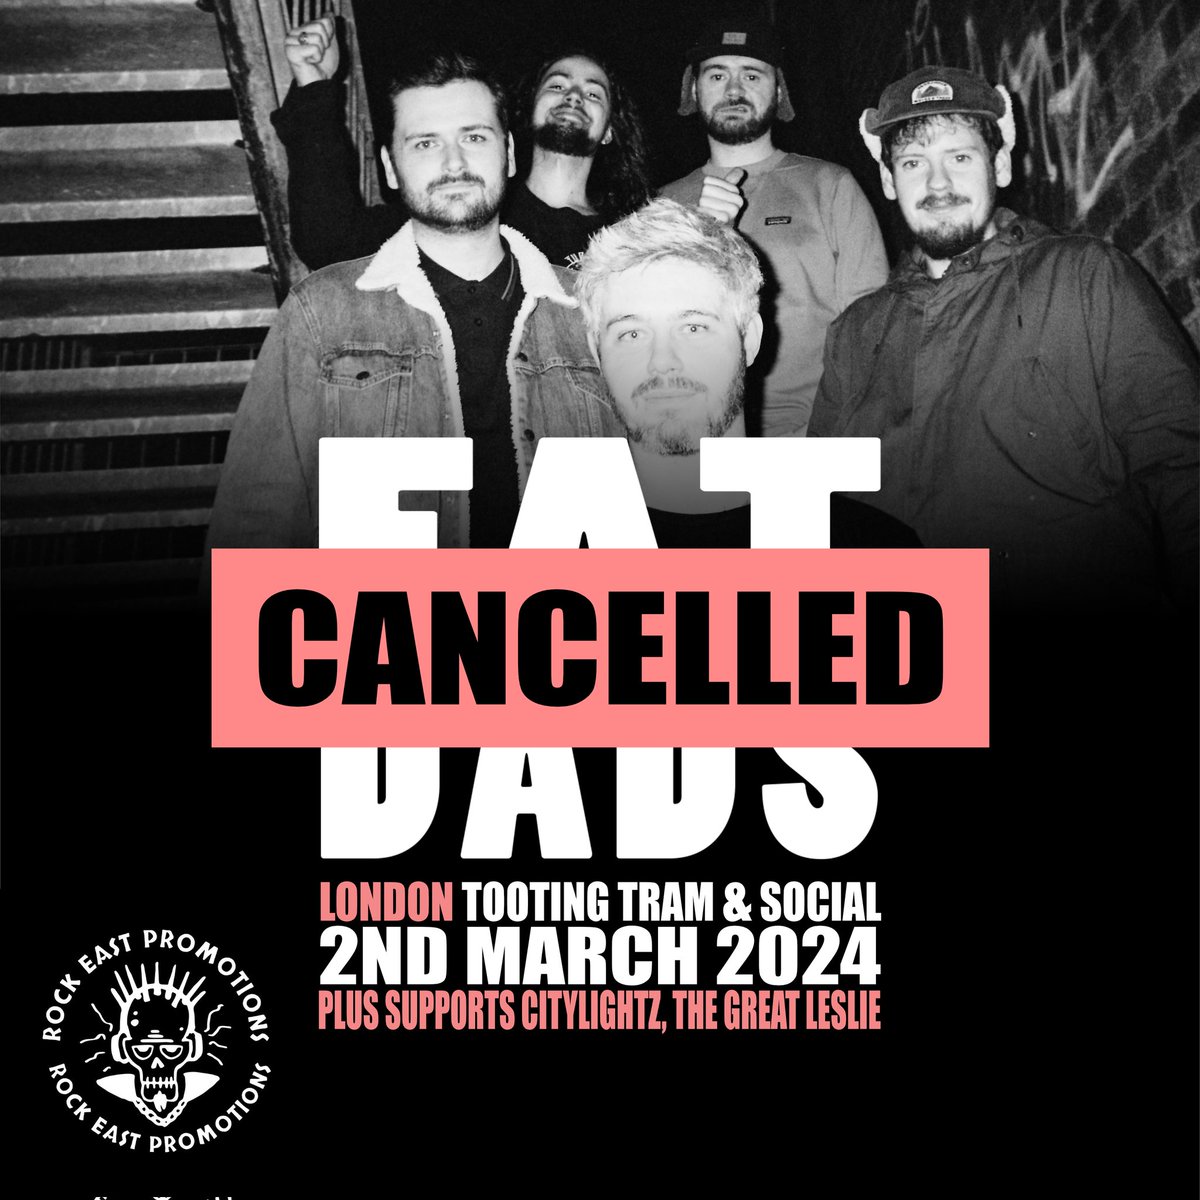 Due to illness, we have unfortunately had to cancel our gig this Saturday in London. We had a great night the last time we played London, so we're gutted we've had to do this. Refunds can either be issued from point of sale, or they can be carried over to our next visit.